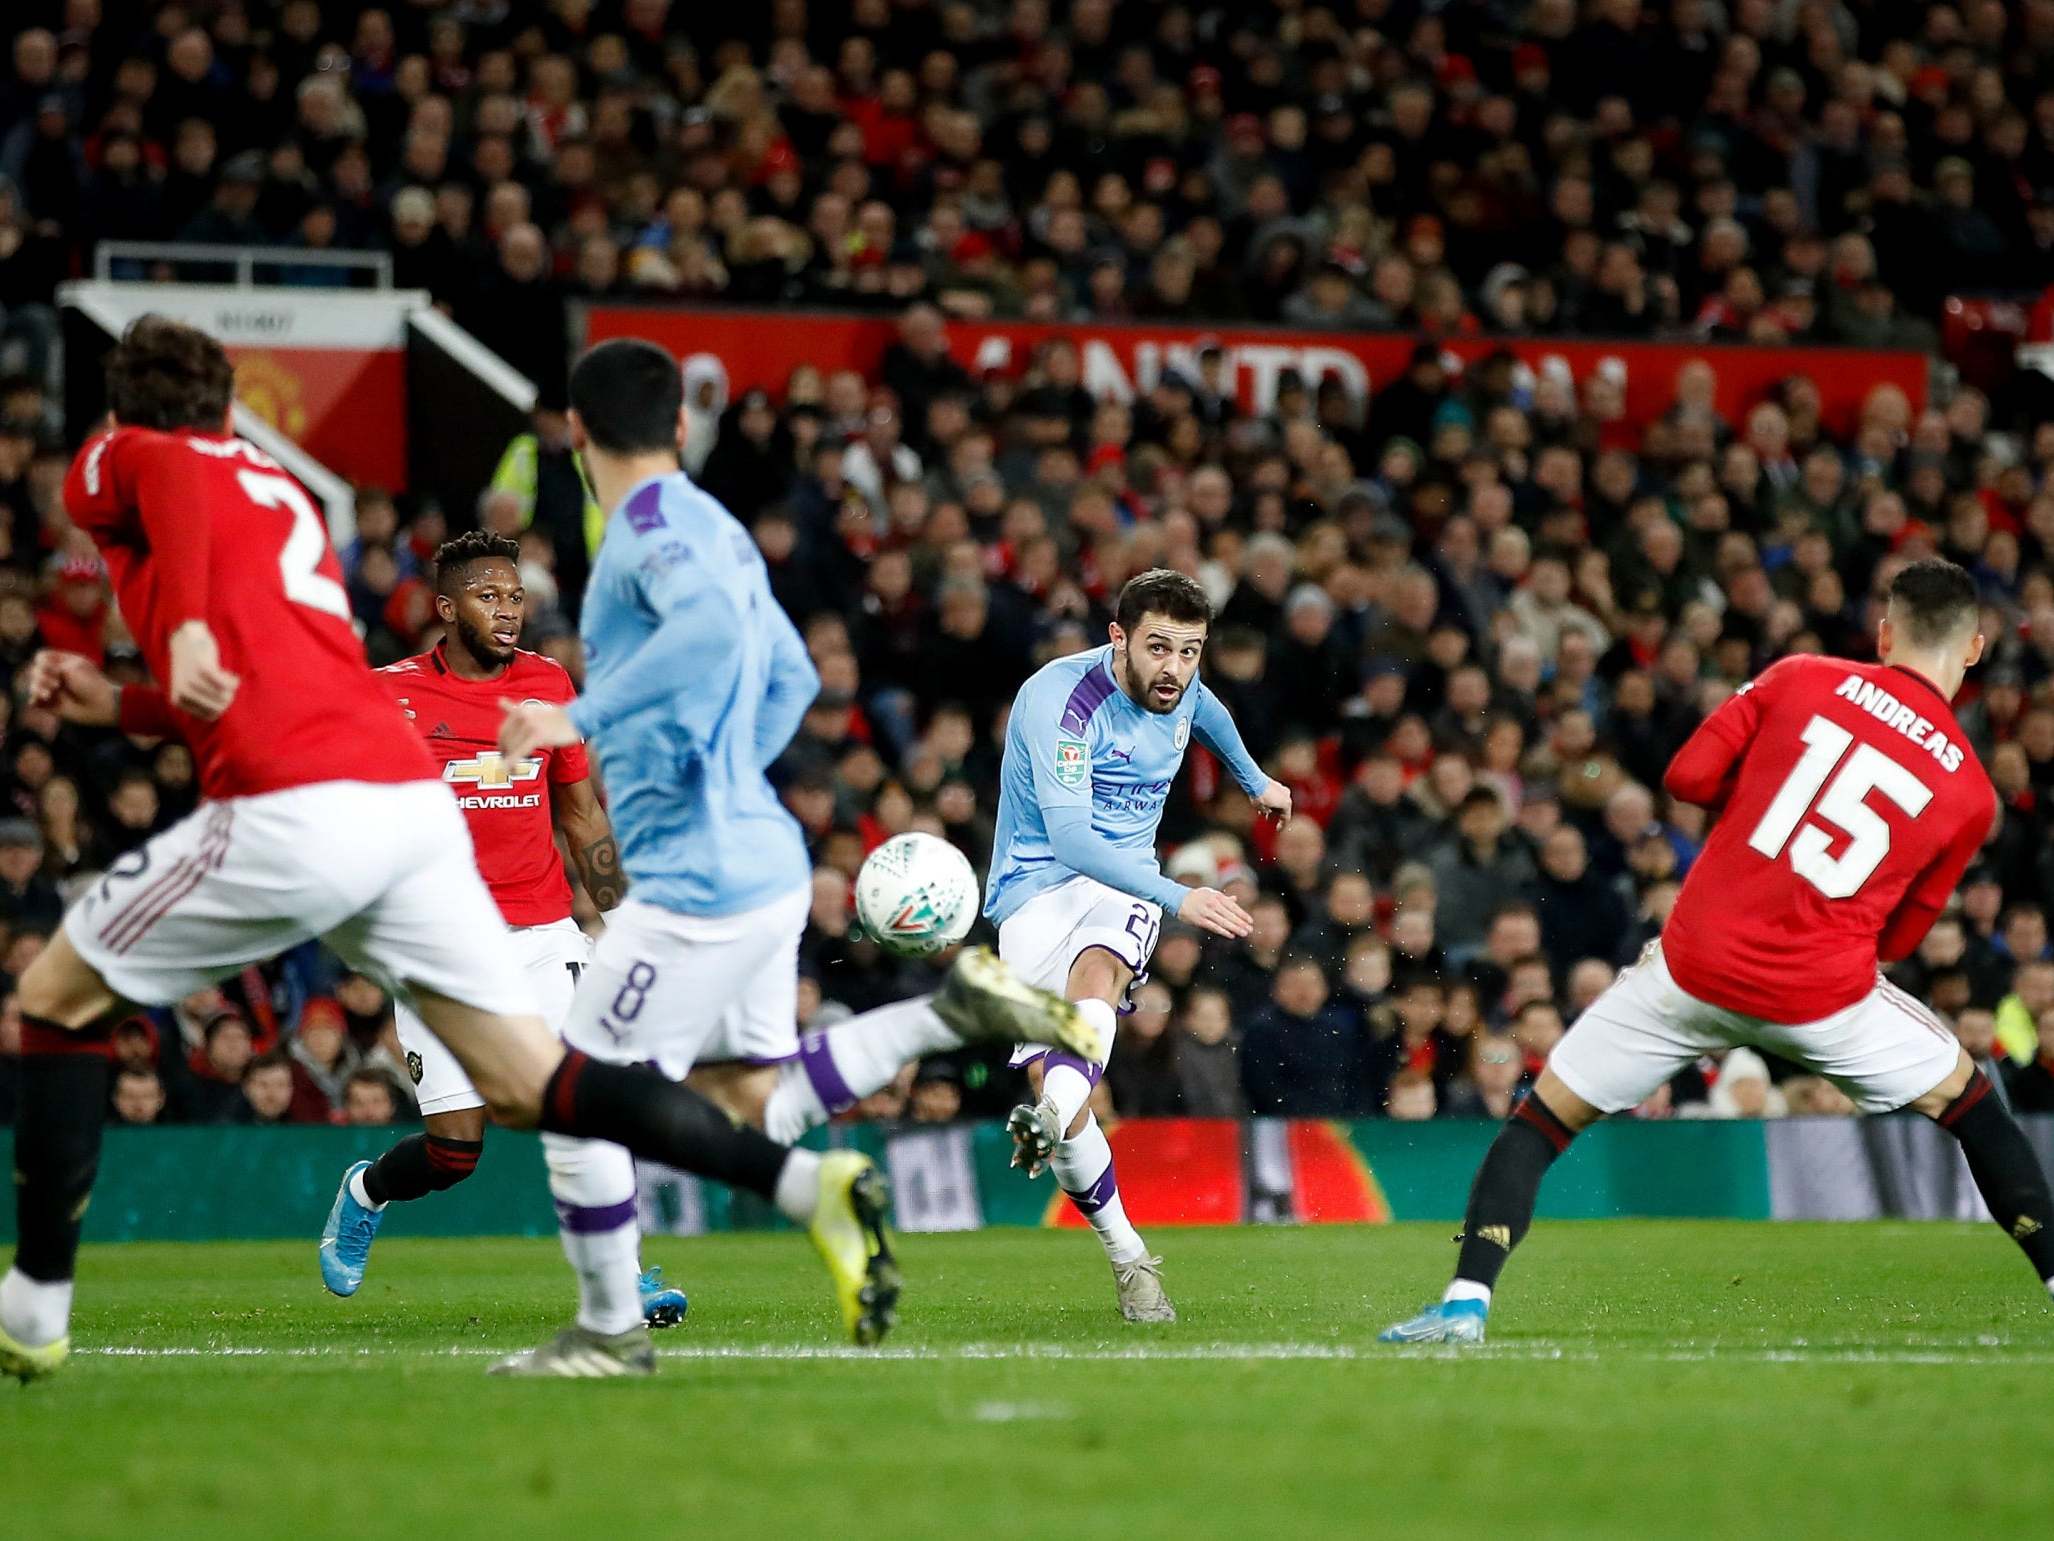 Manchester United vs Man City LIVE: Result, final score and reaction